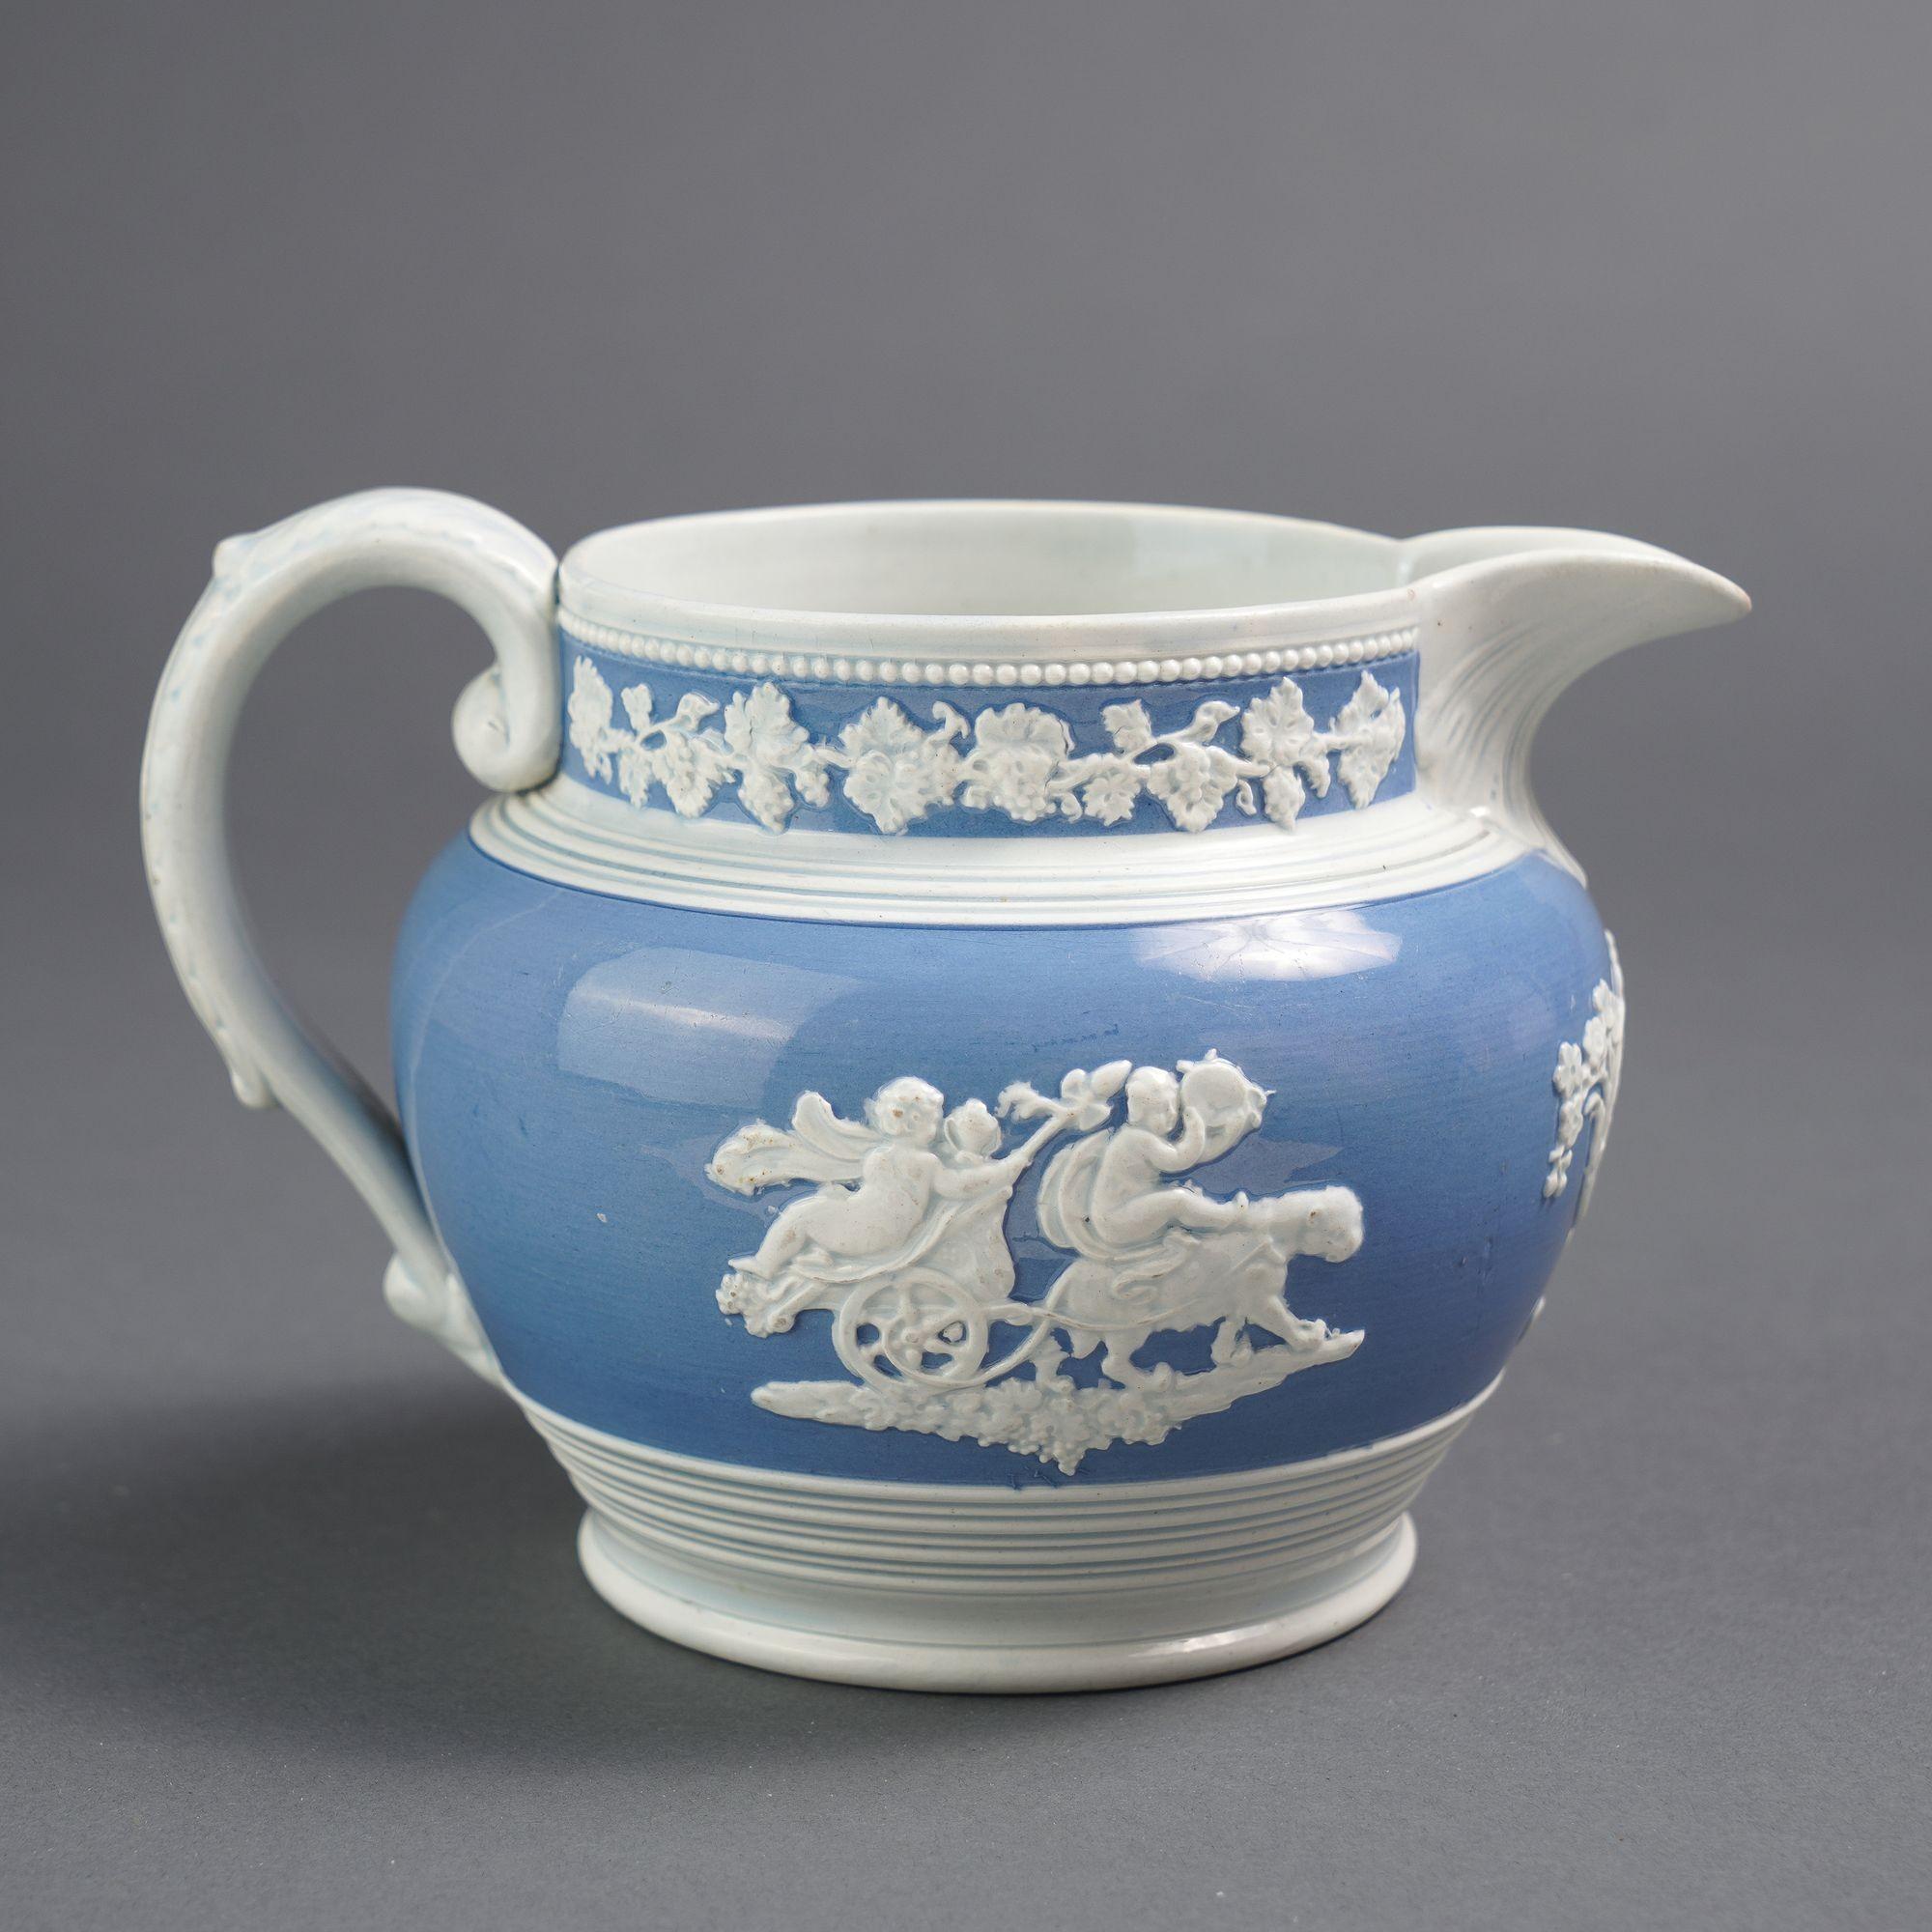 19th Century English Staffordshire pearlware pitcher by Chetham & Woolley, 1820-30 For Sale